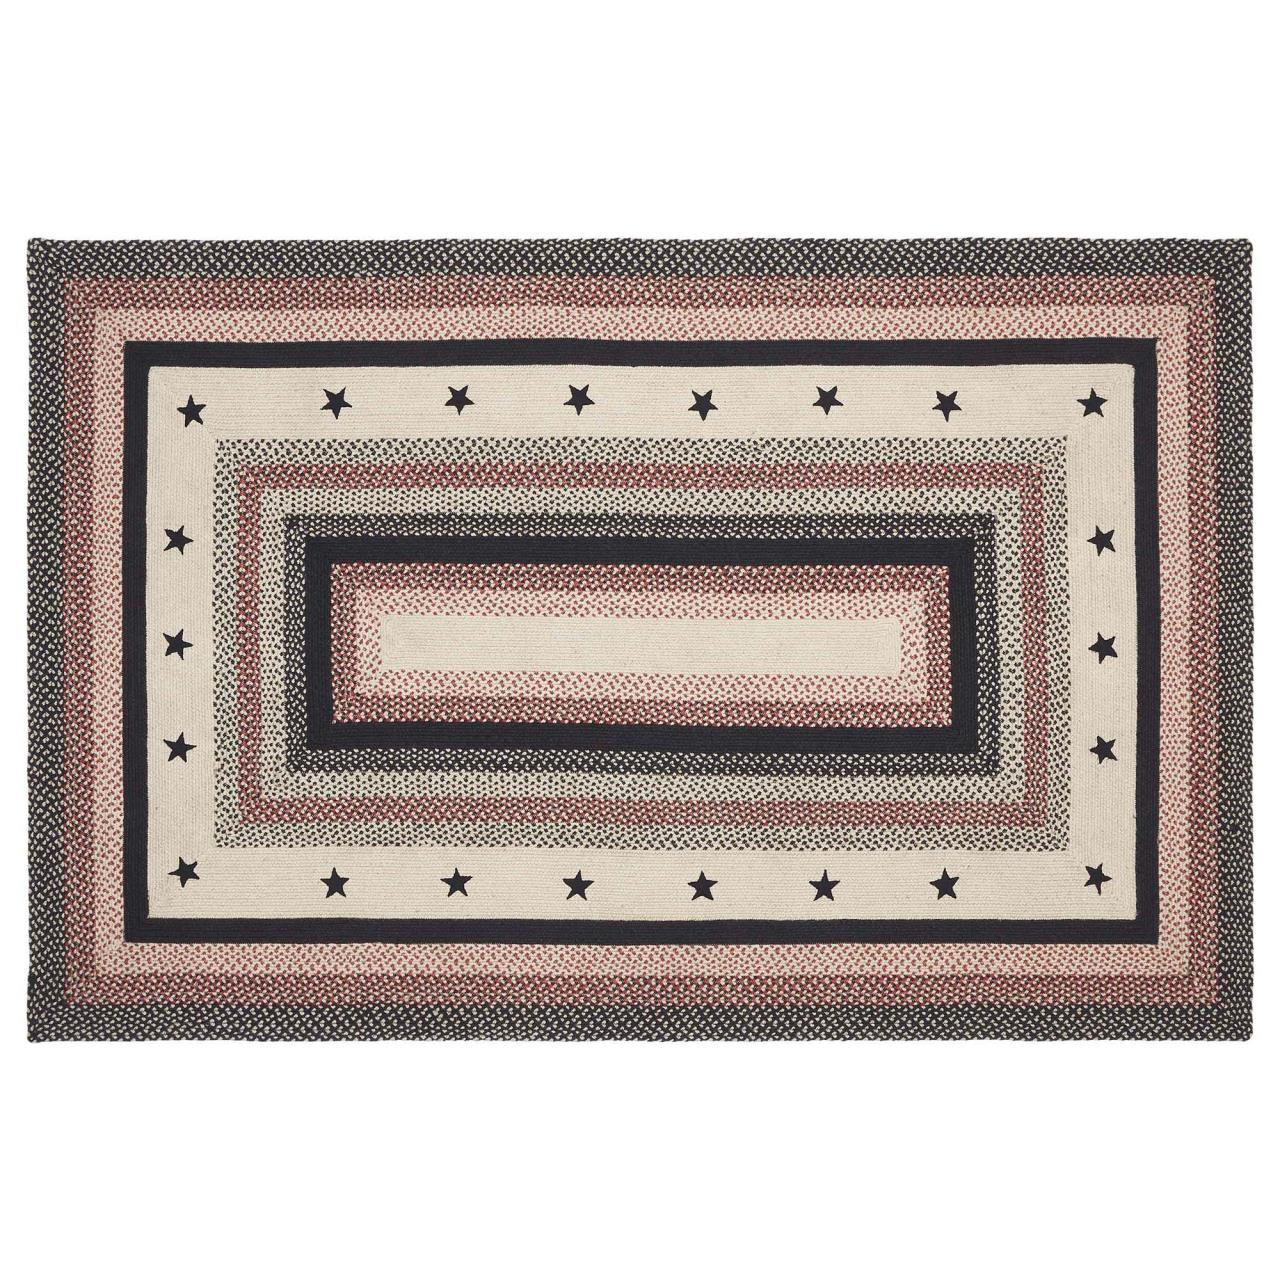 Colonial Star Jute Braided Rug/Runner Oval with Rug Pad 22x72